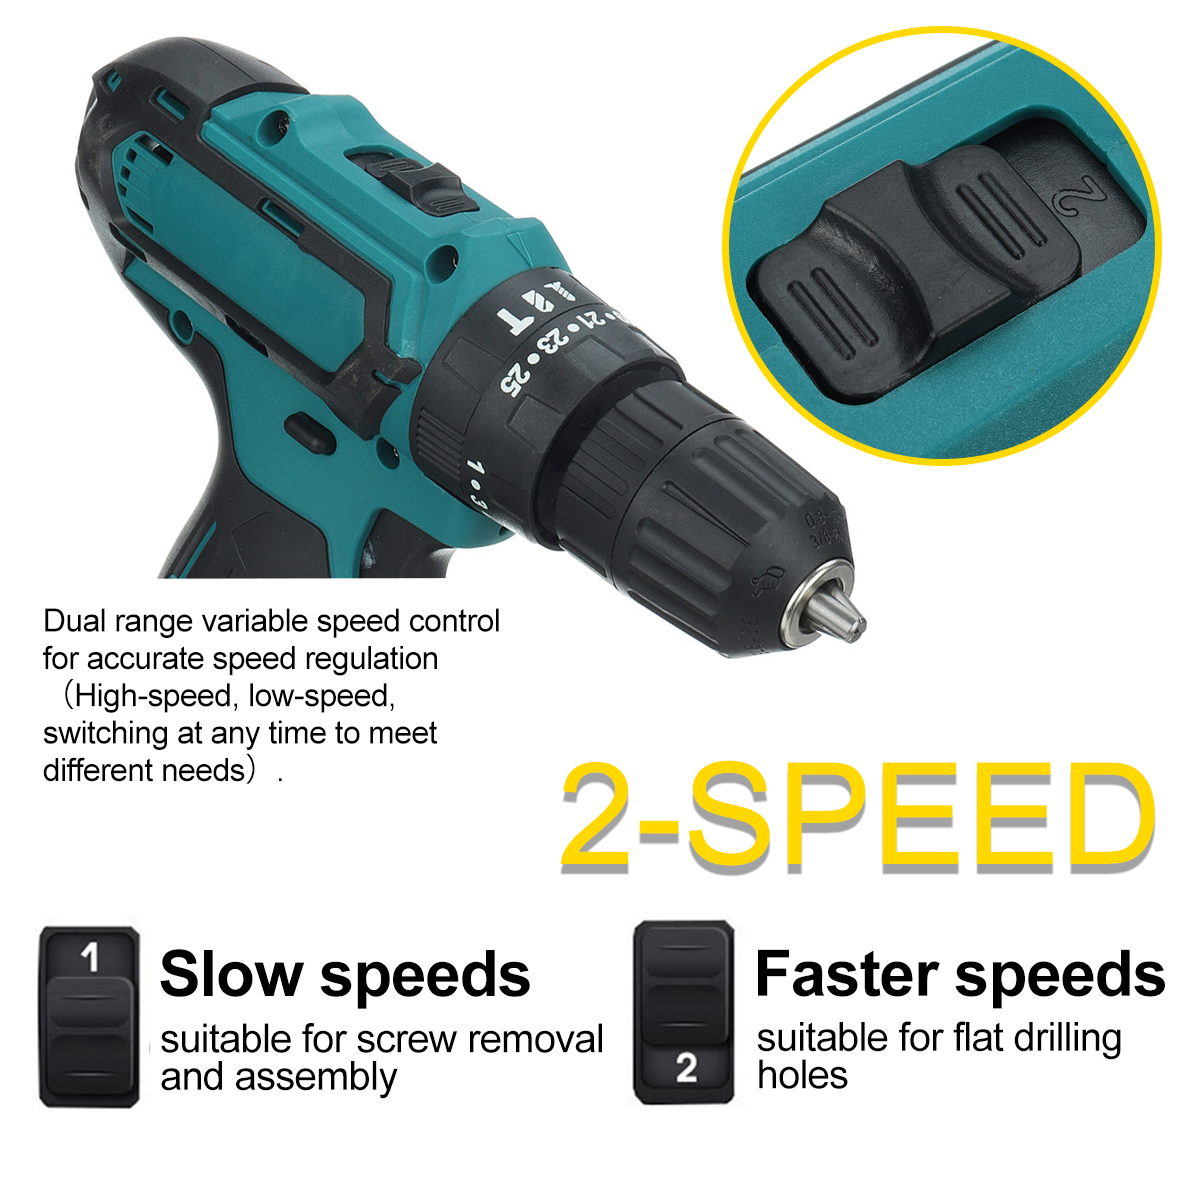 Cordless-Rechargeable-Electric-Drill-Screwdriver-LED-Portable-Metal-Wood-Drilling-Tool-W-12pcs-Batte-1848720-3